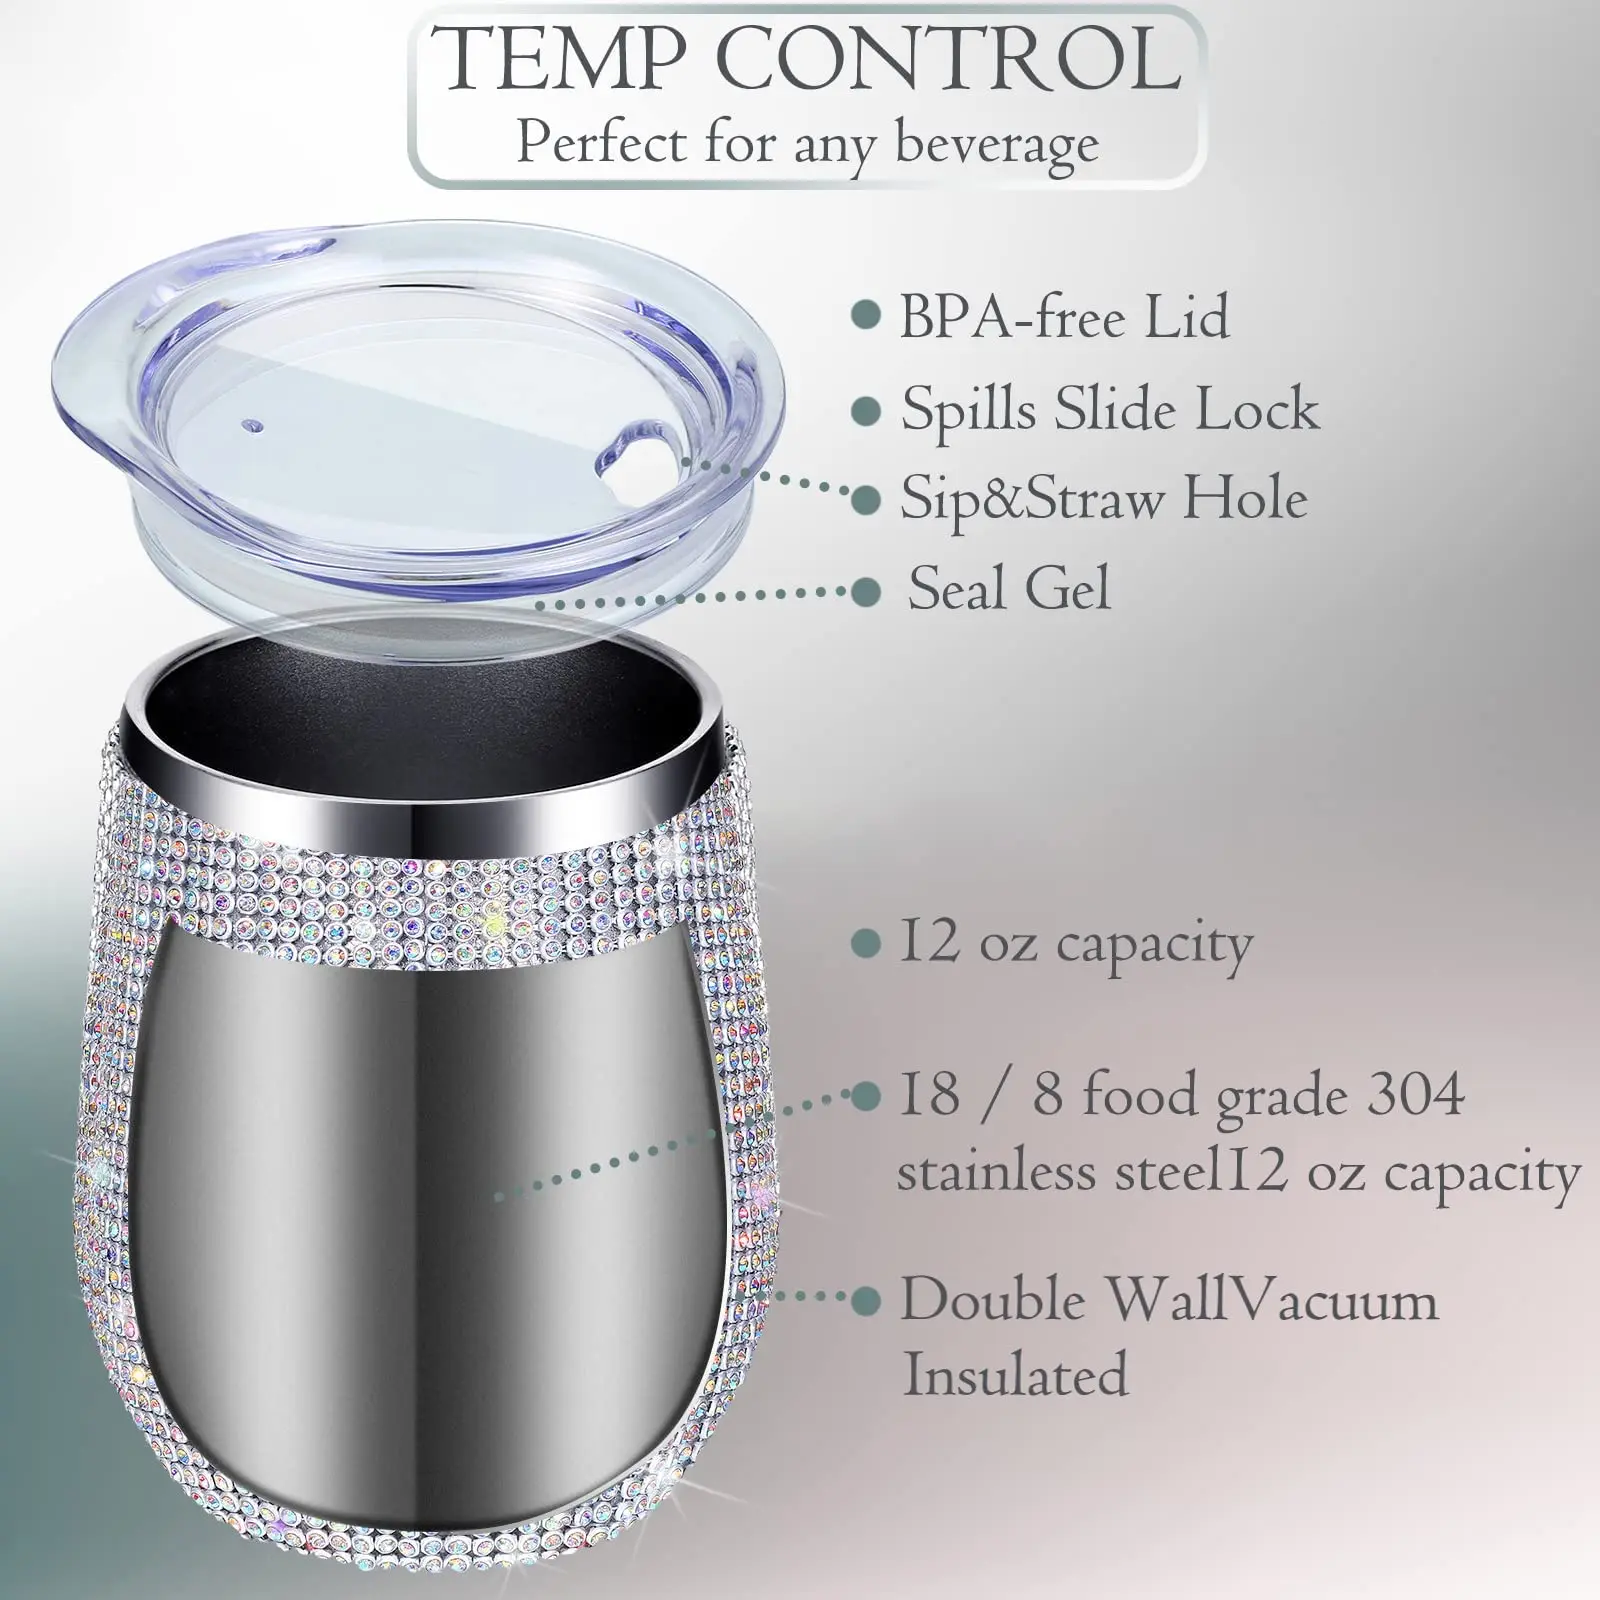 https://ae01.alicdn.com/kf/Sbdc9e8e9becf4052bf6b33f6d701d9b5p/12oz-Shiny-Diamond-Tumbler-Wine-Beer-Cup-Vacuum-Thermo-Champagne-Mug-Cup-Stainless-Steel-With-Sealed.jpg